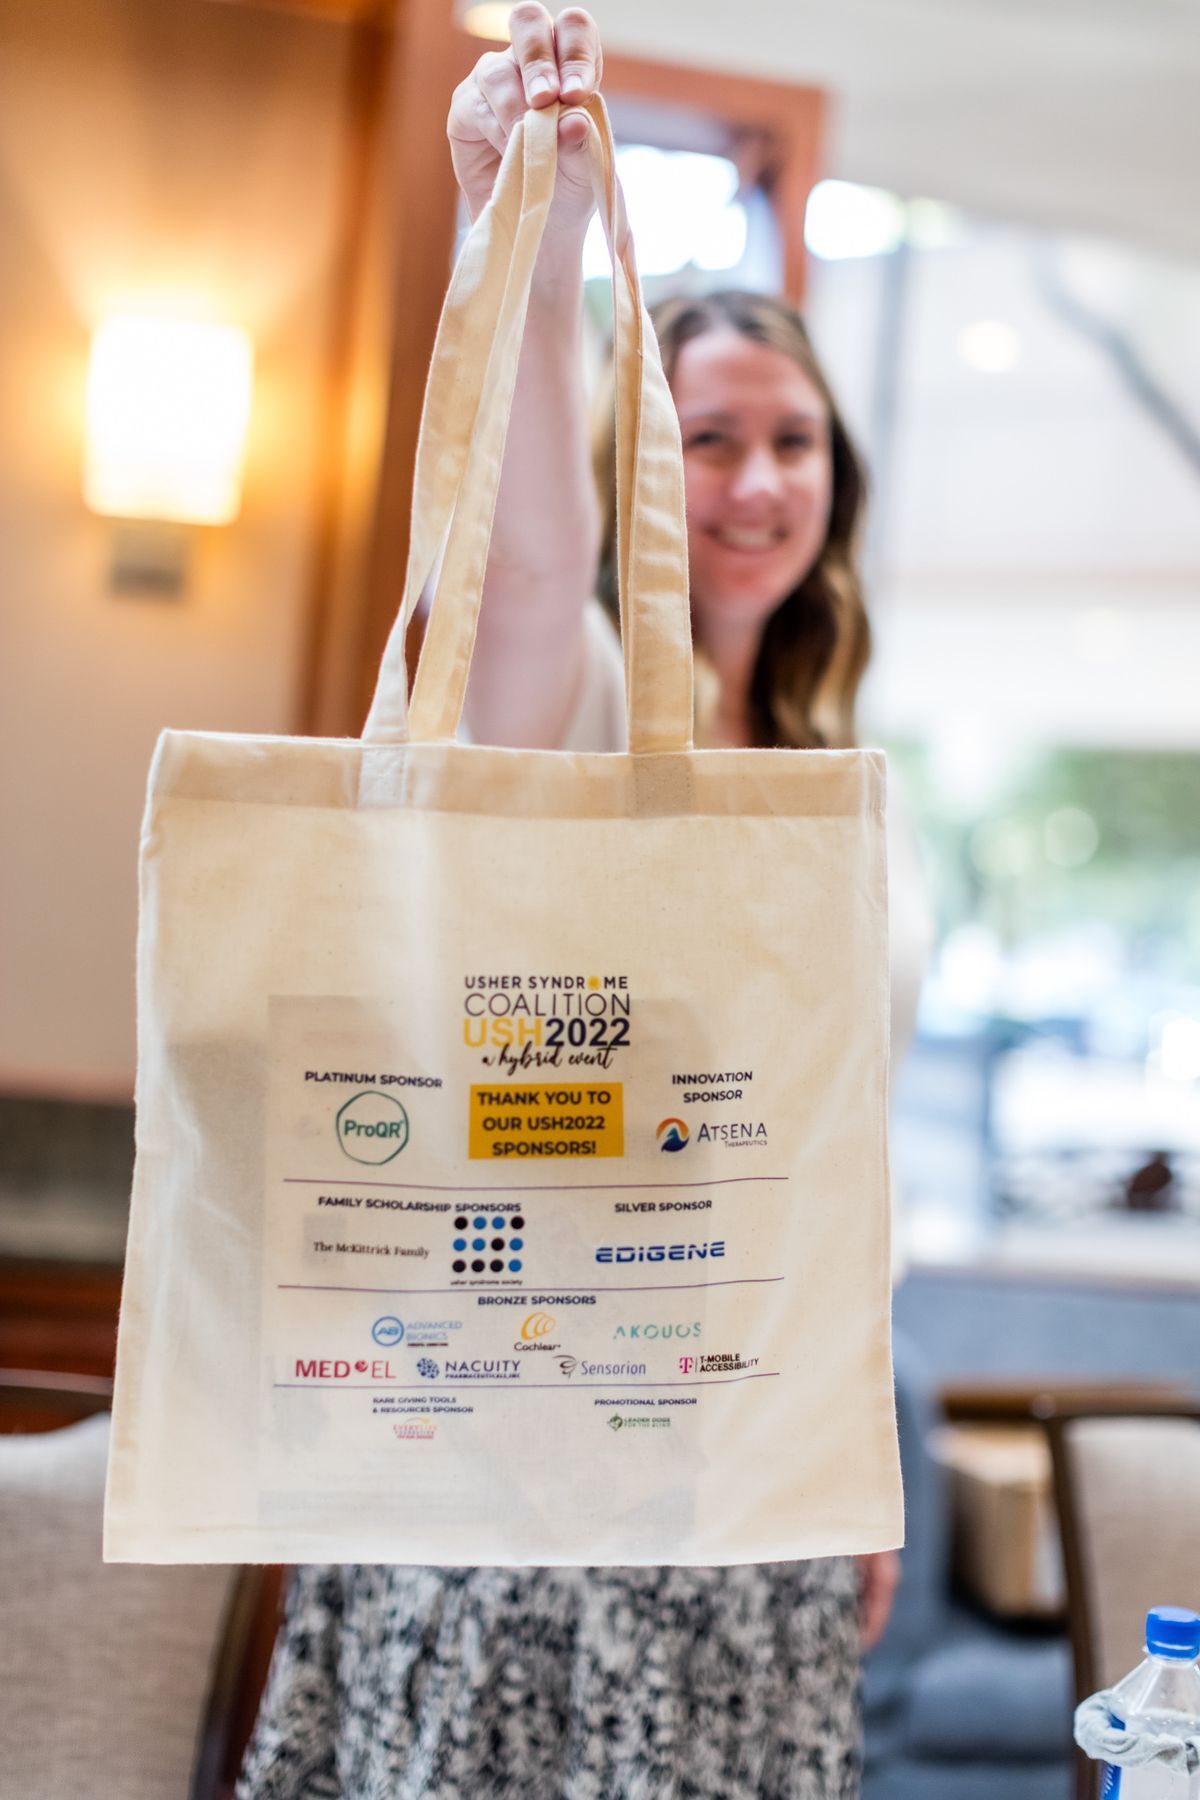 A woman is holding up the USH 2022 Connections Conference Tote Bag that is a light tan color with all of the Conference sponsors logos on the bag.